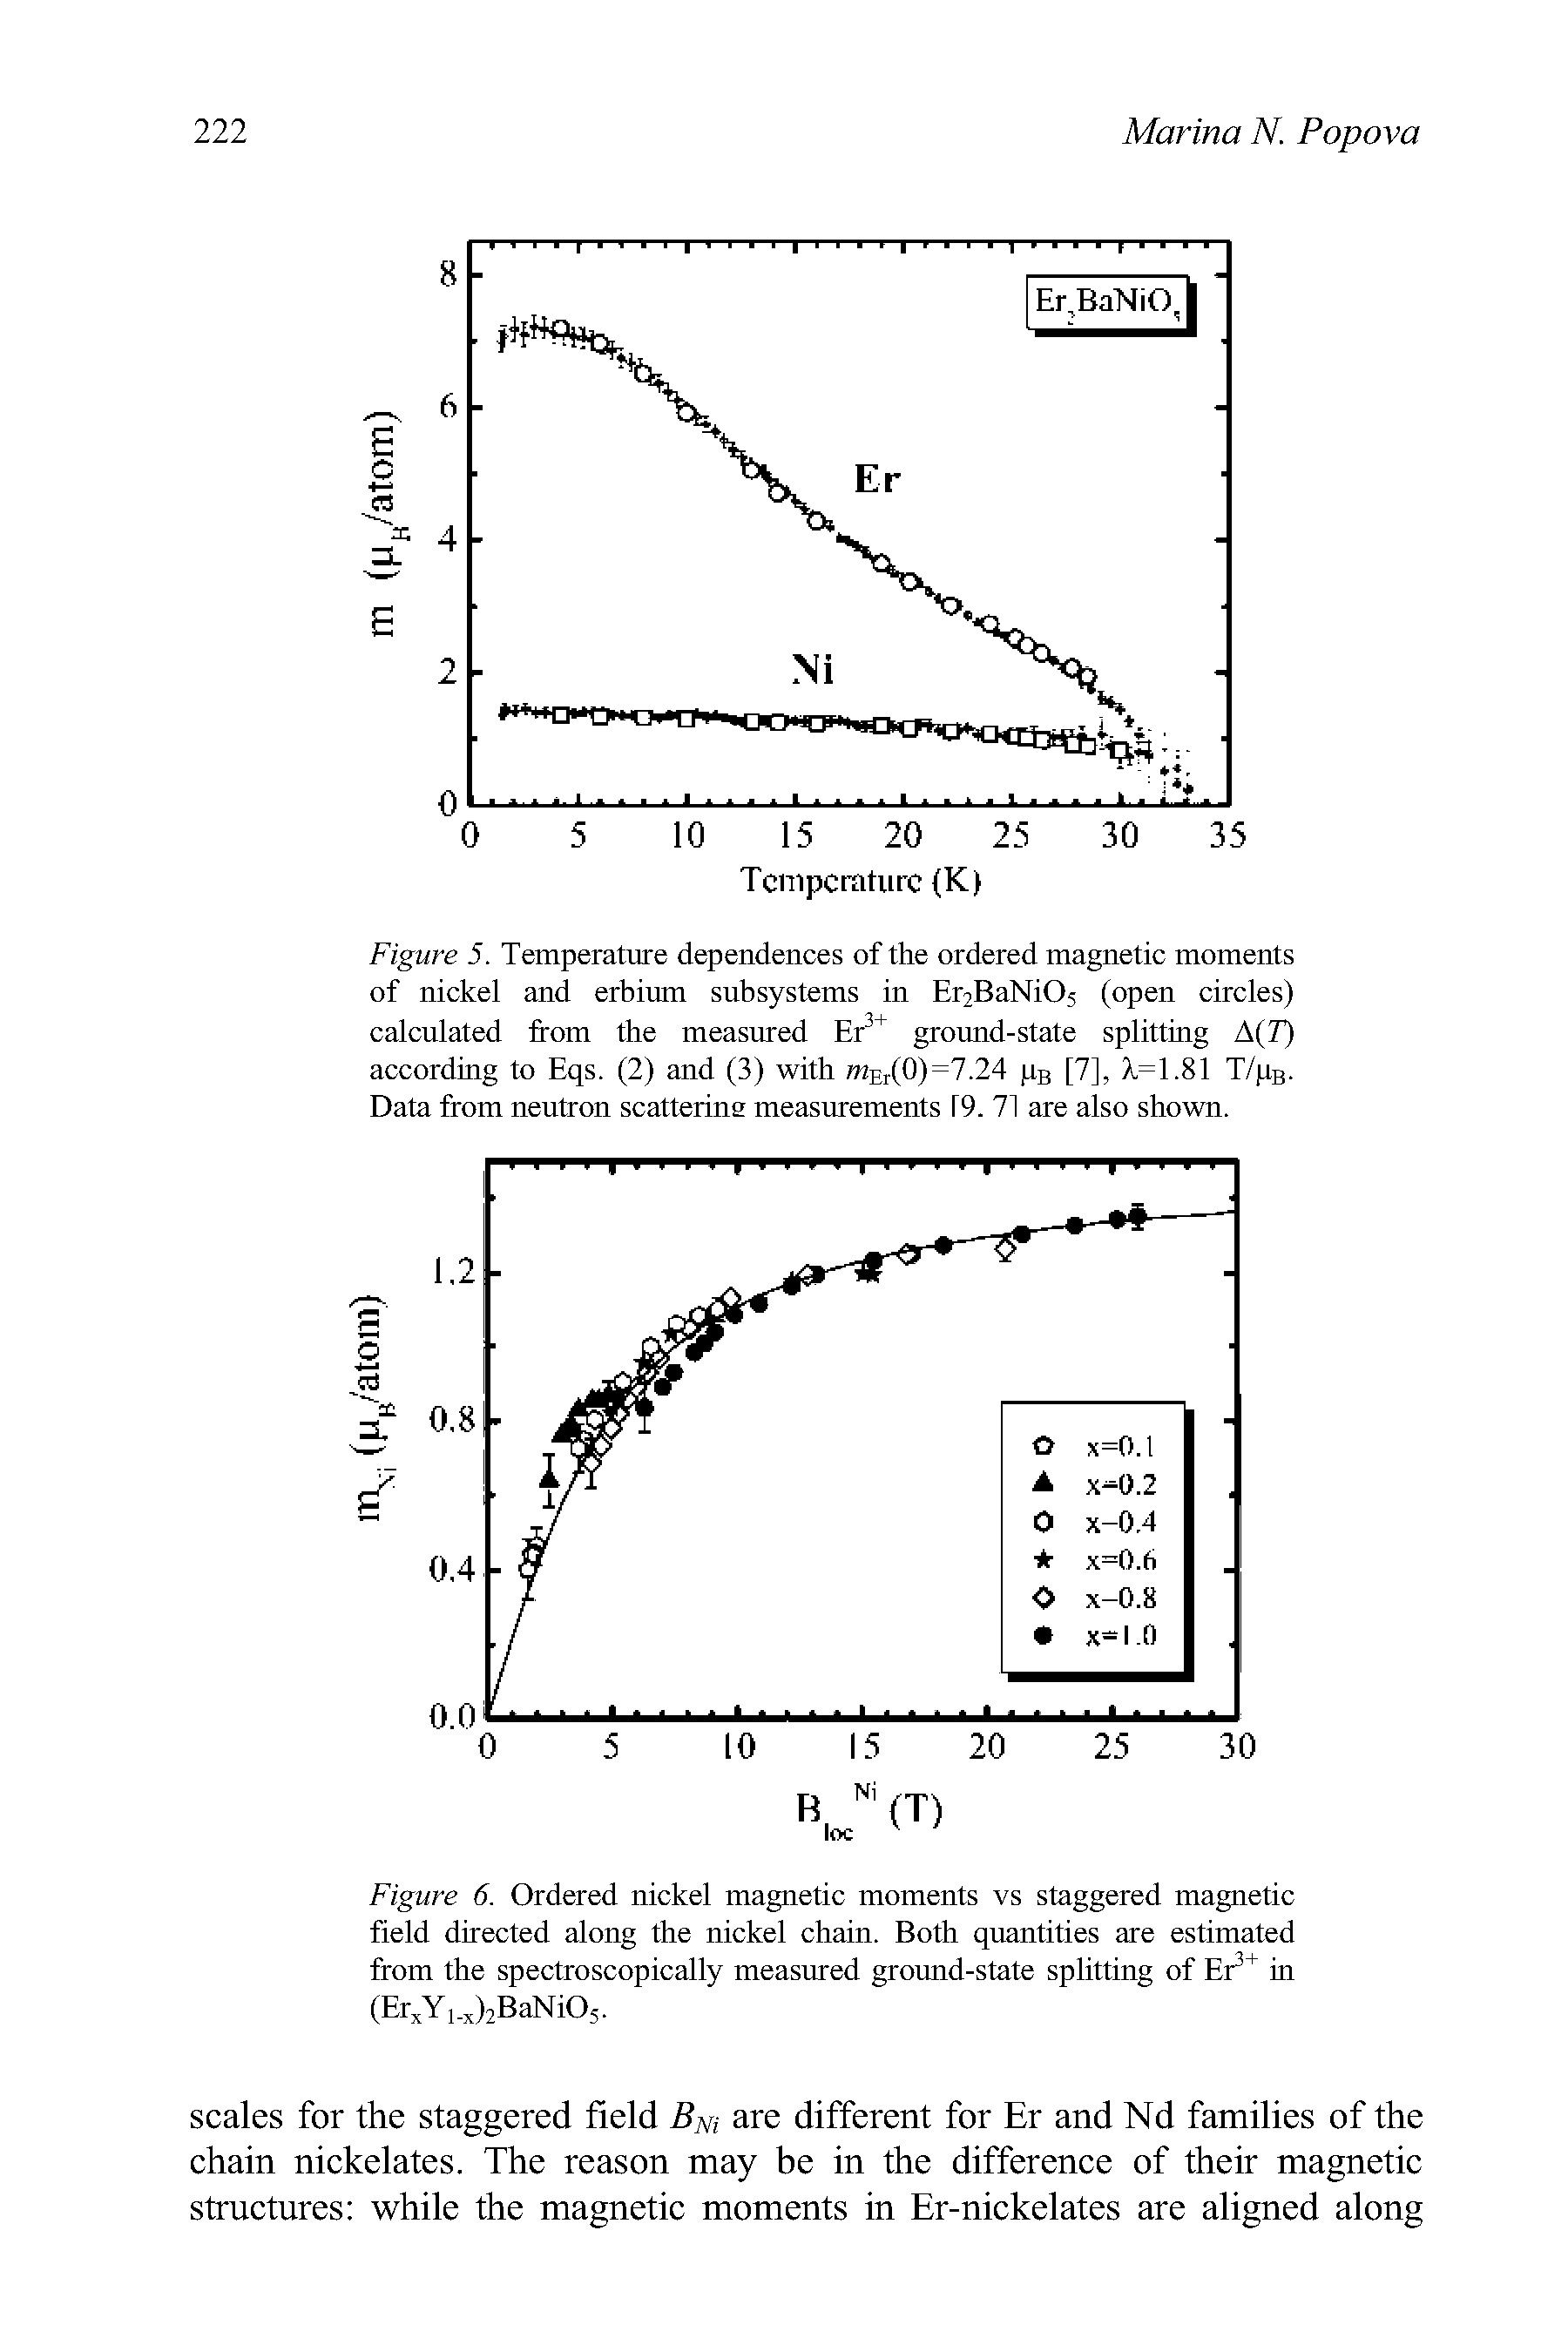 Figure 6. Ordered nickel magnetic moments vs staggered magnetic field directed along the nickel chain. Both quantities are estimated from the spectroscopically measured ground-state splitting of Er3+ in (ErxY1.x)2BaNi05.